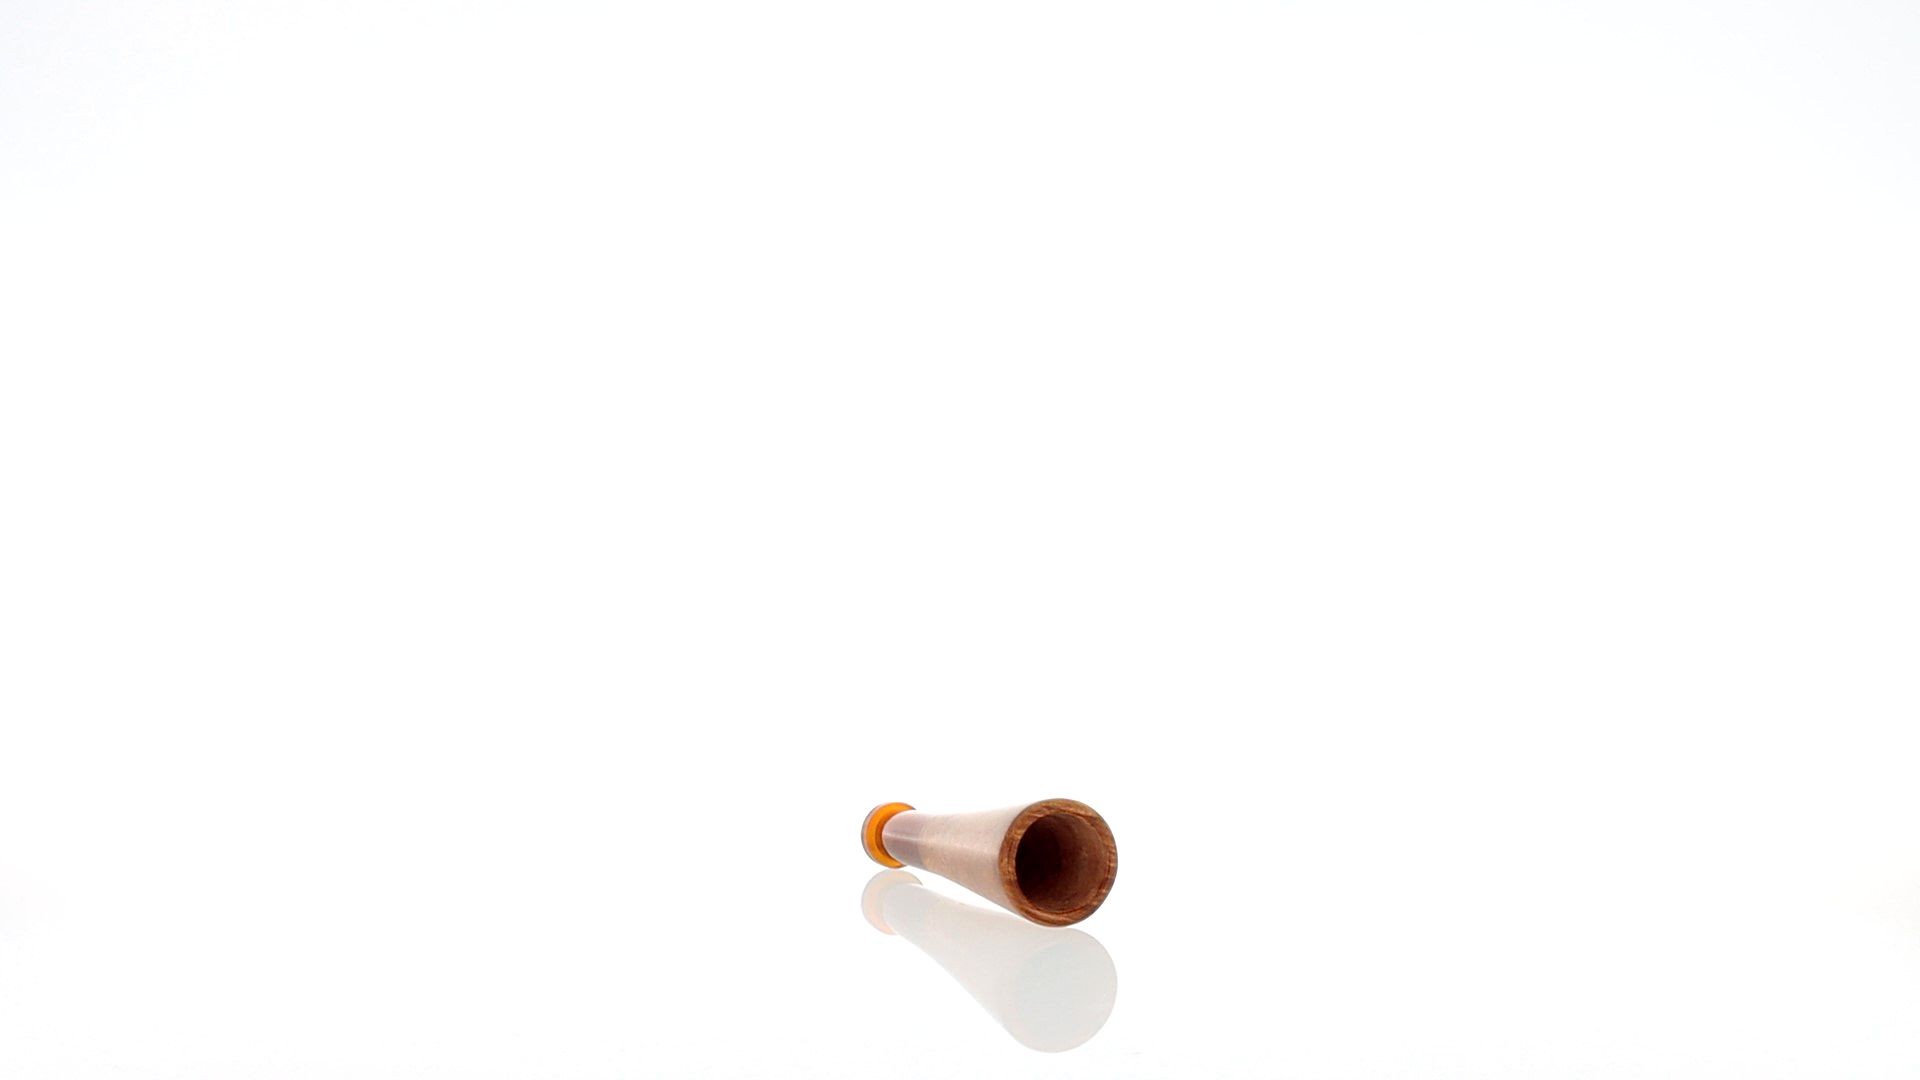 Tuscan smoke in briar with conical hole and amber colored mouthpiece